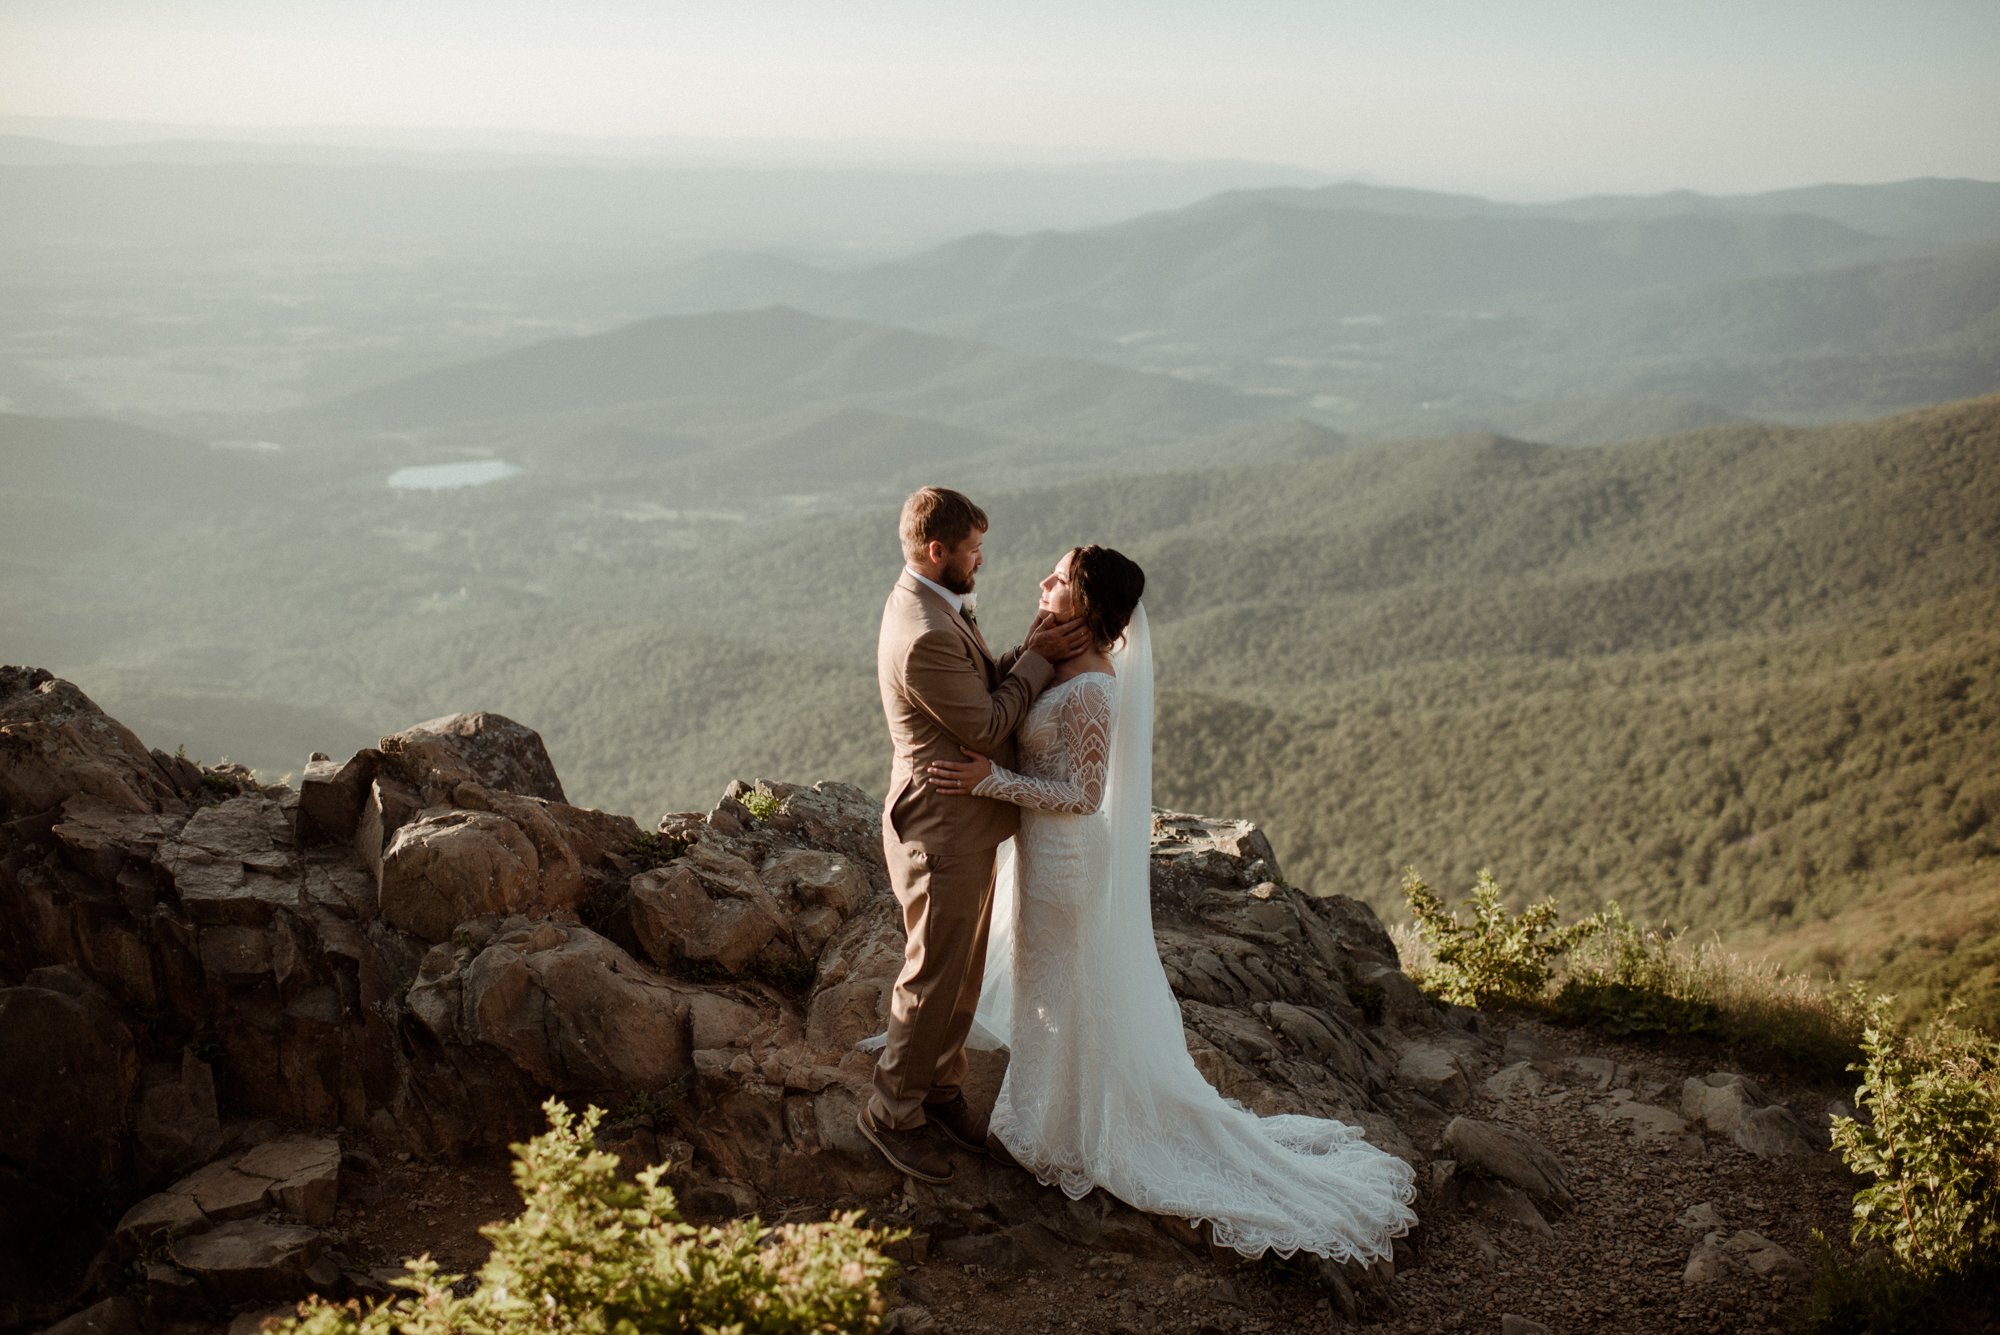 Sunset Elopement on Stony Man Summit in Shenandoah National Park - White Sails Creative Elopement Photography - July Elopement on the Blue Ridge Parkway_51.jpg